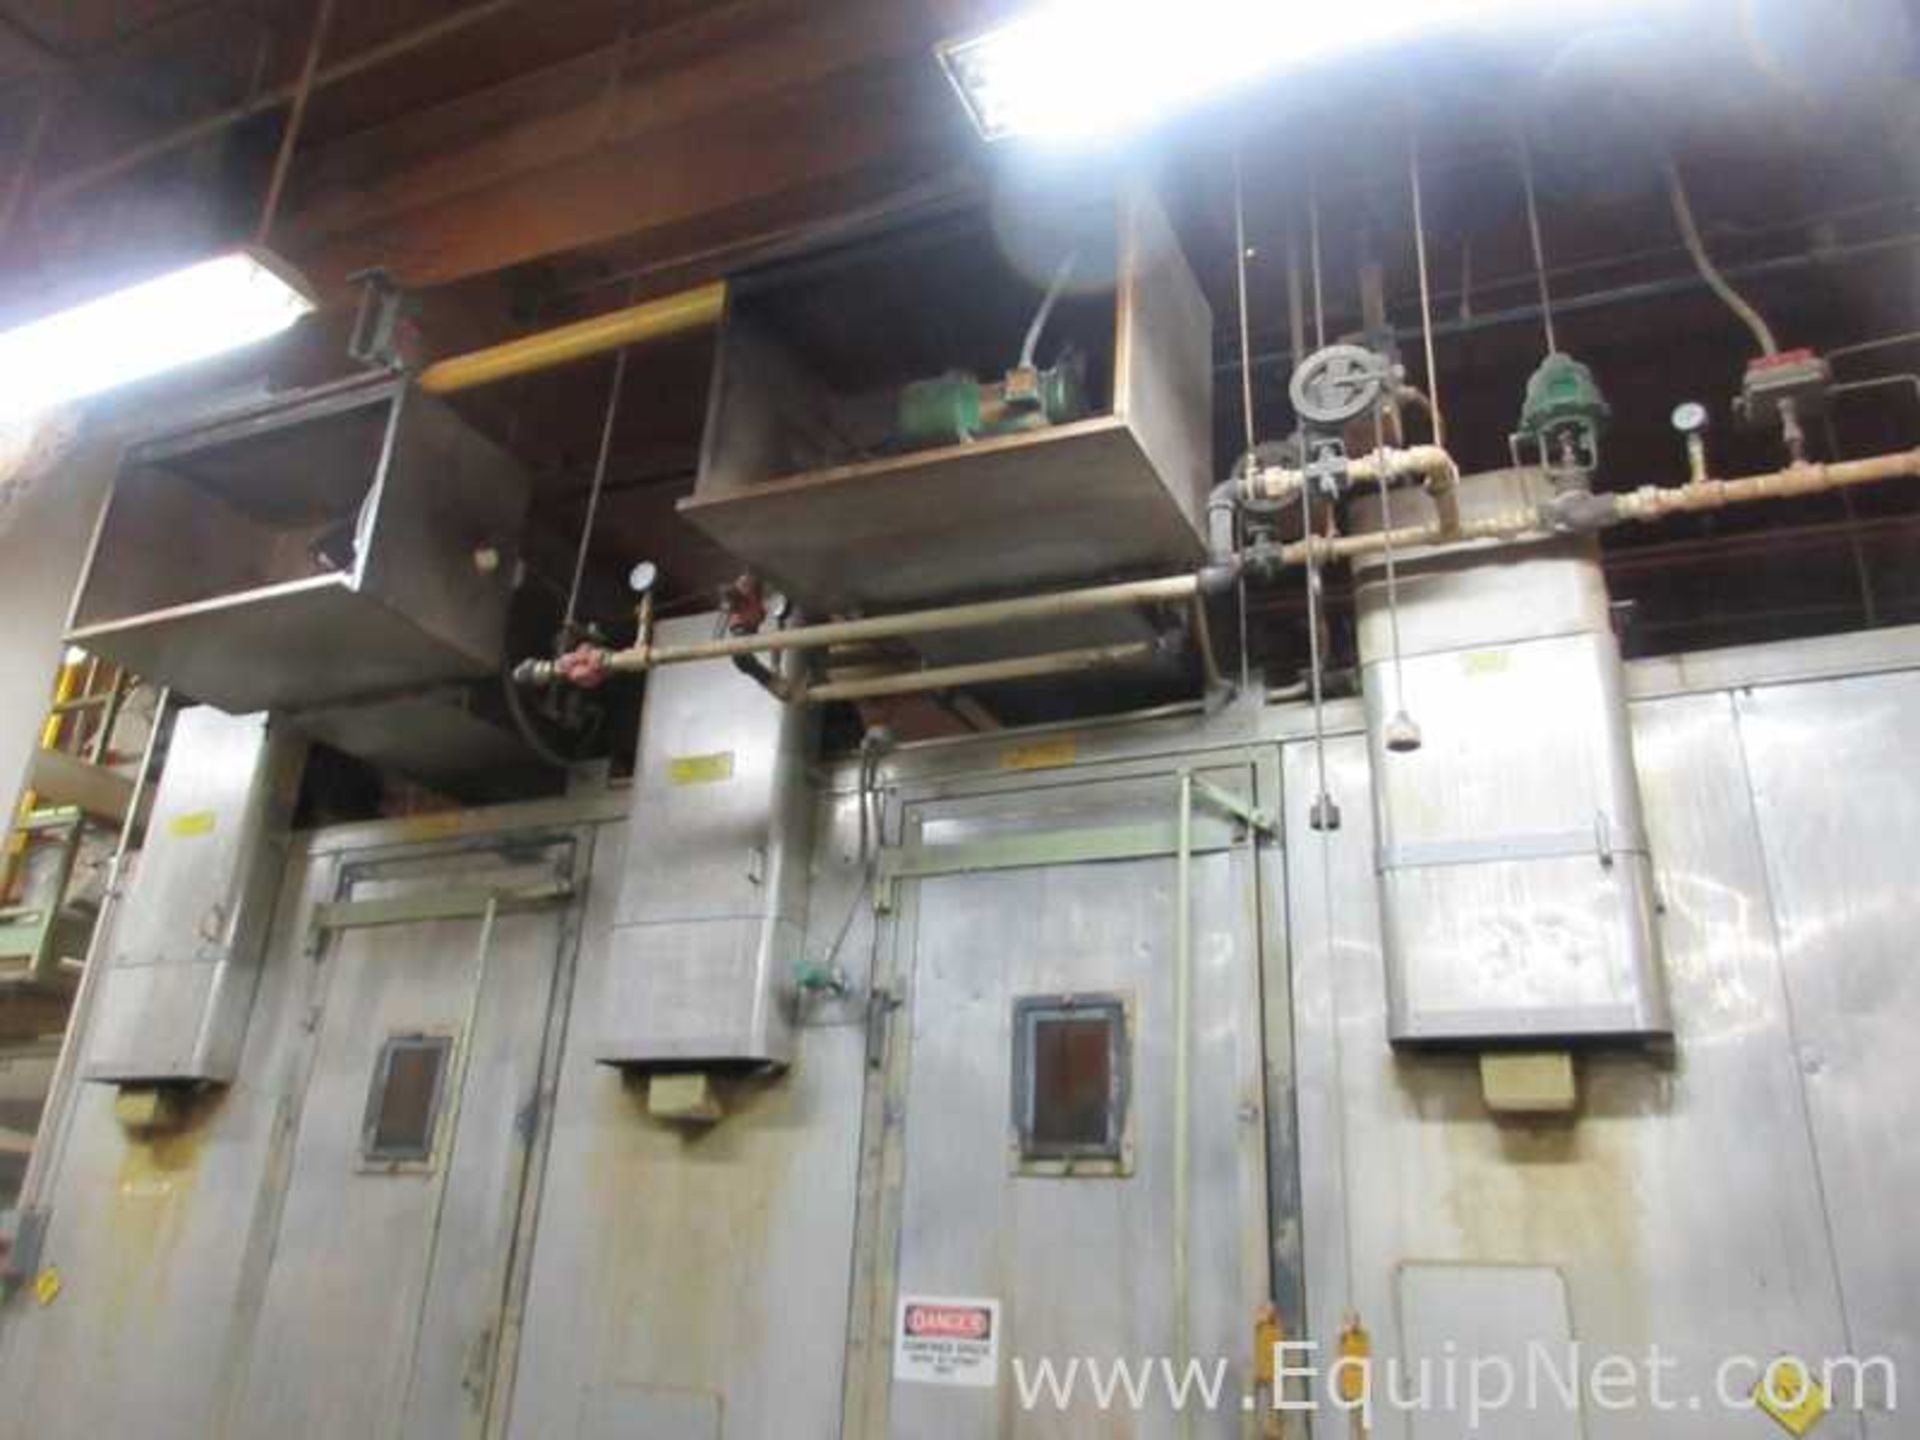 EQUIPNET LISTING #597061; REMOVAL COST: $0; DESCRIPTION: National Drying Machinery Belt - Image 3 of 27